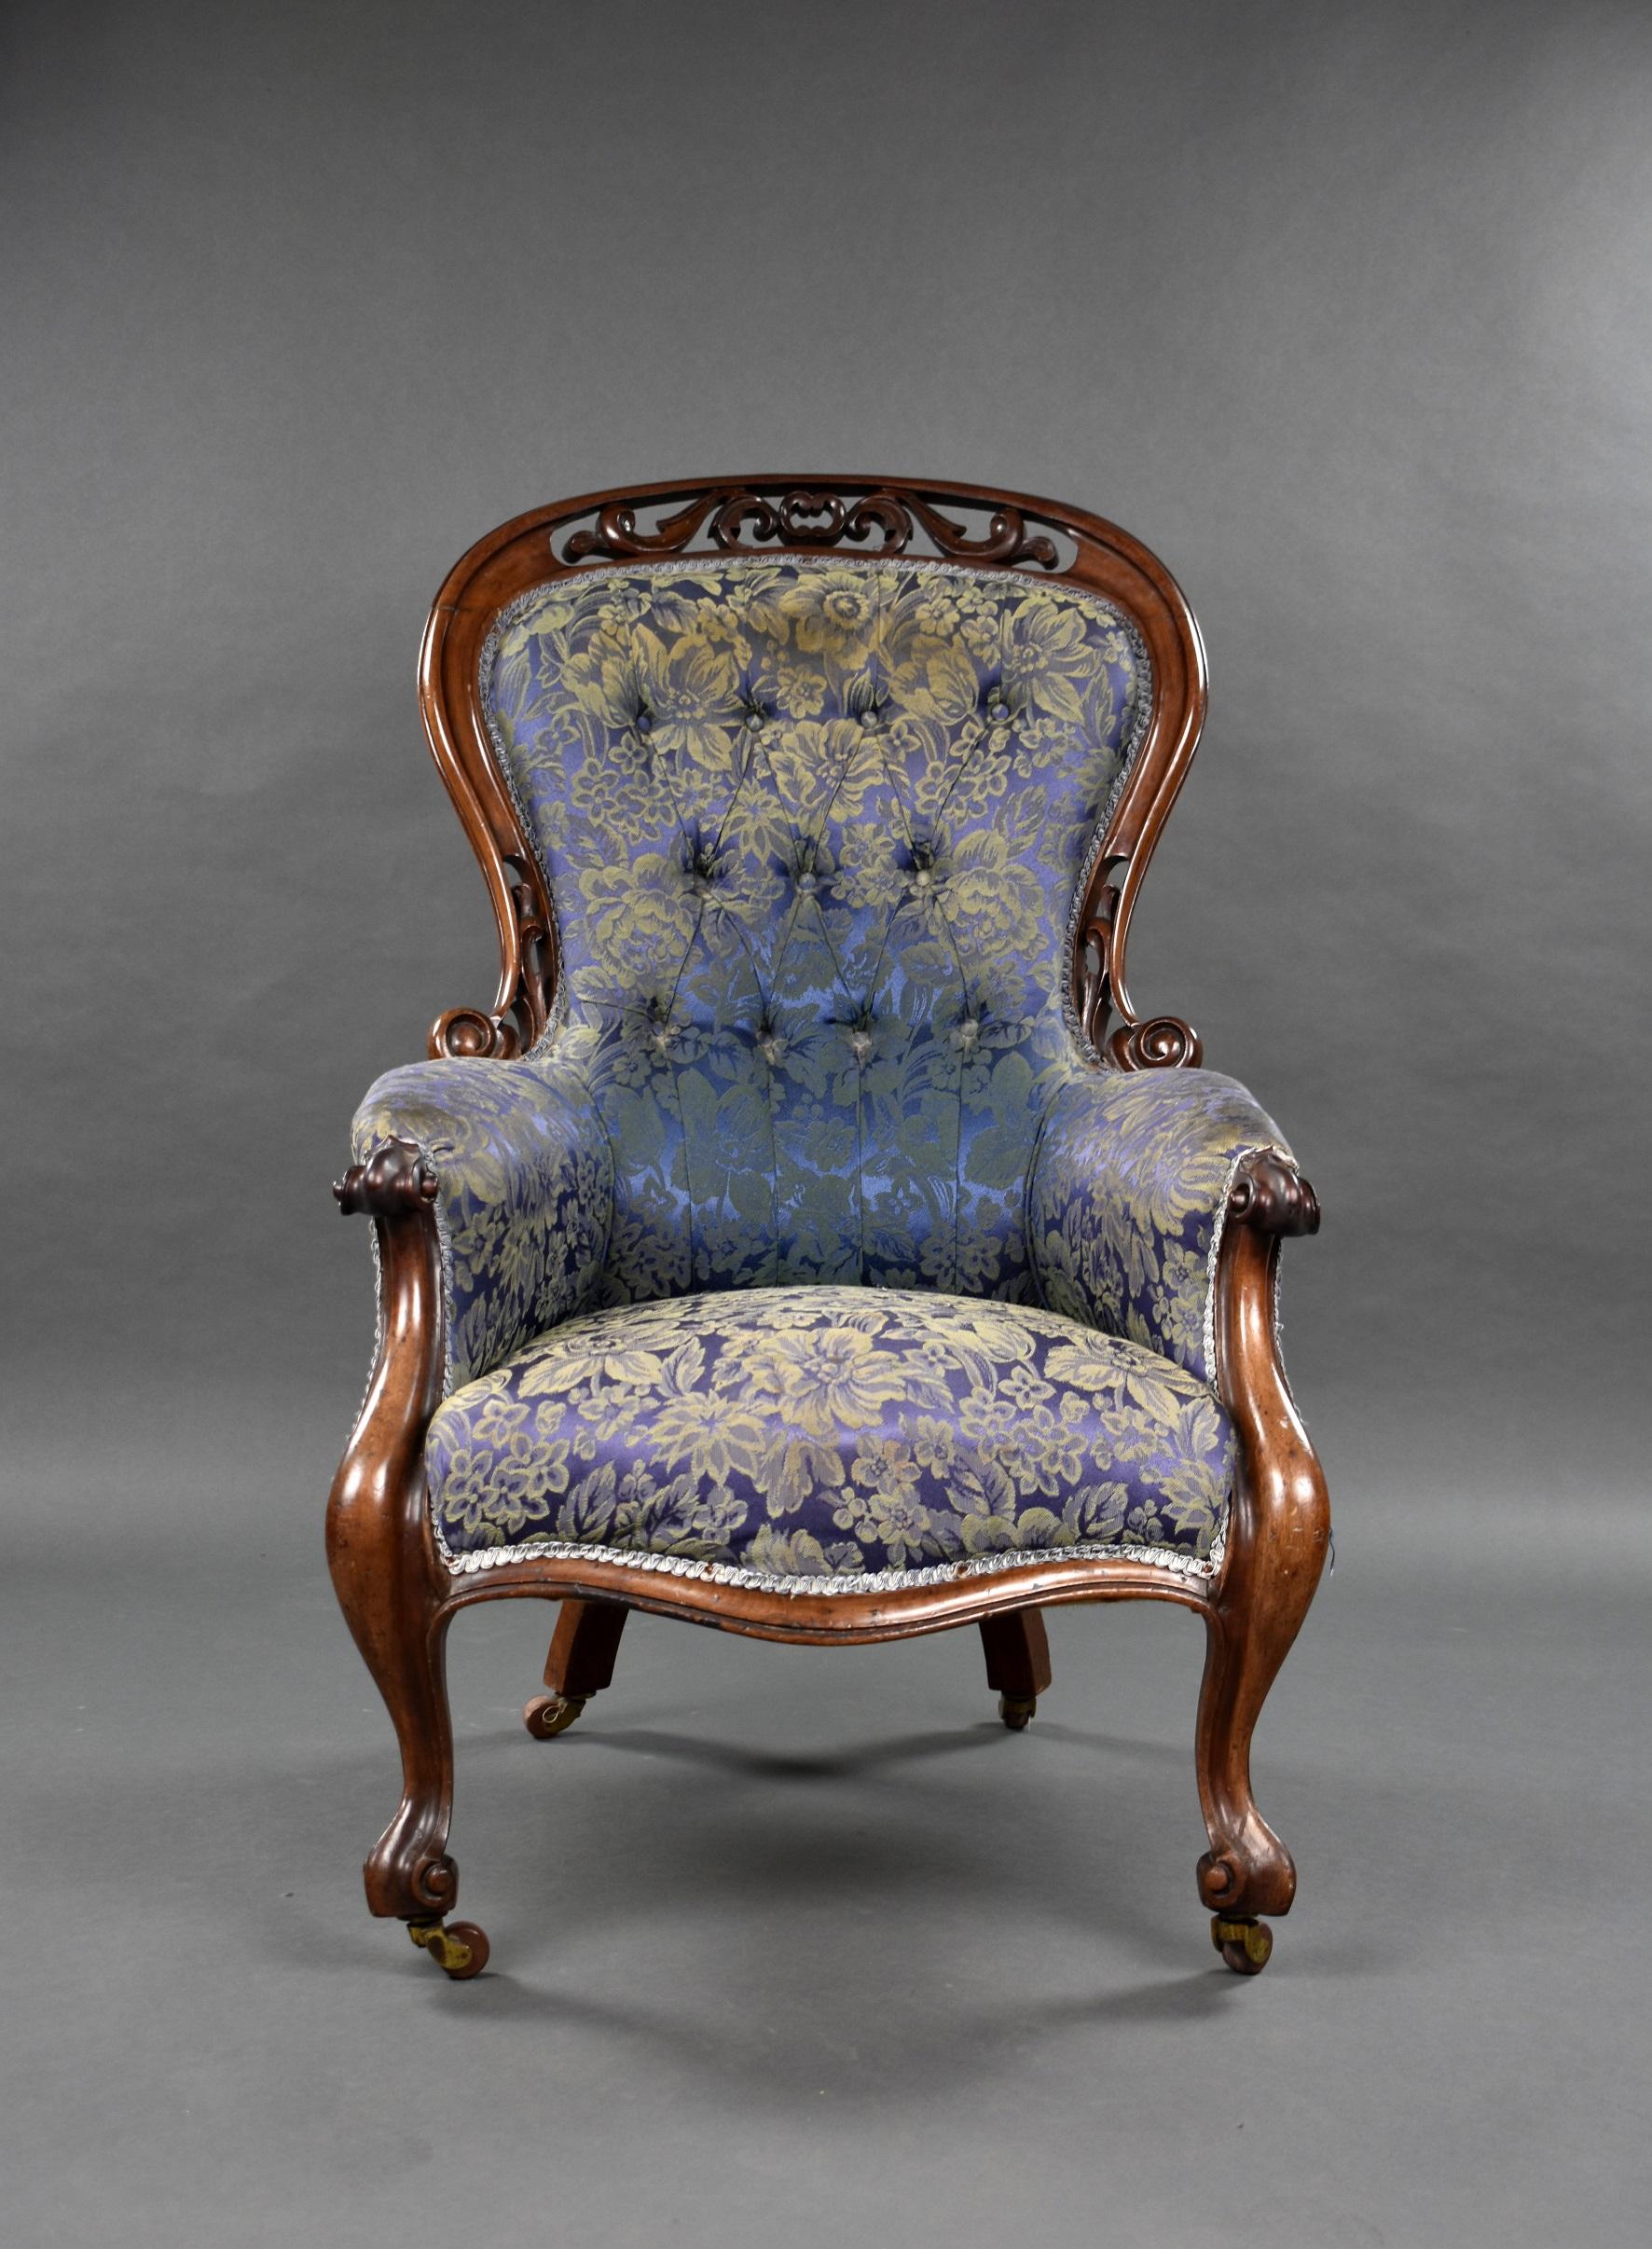 Victorian carved walnut open antique armchair, with button
upholstered spoon back and seat within pierced carved frame with cabriole legs standing on castors.